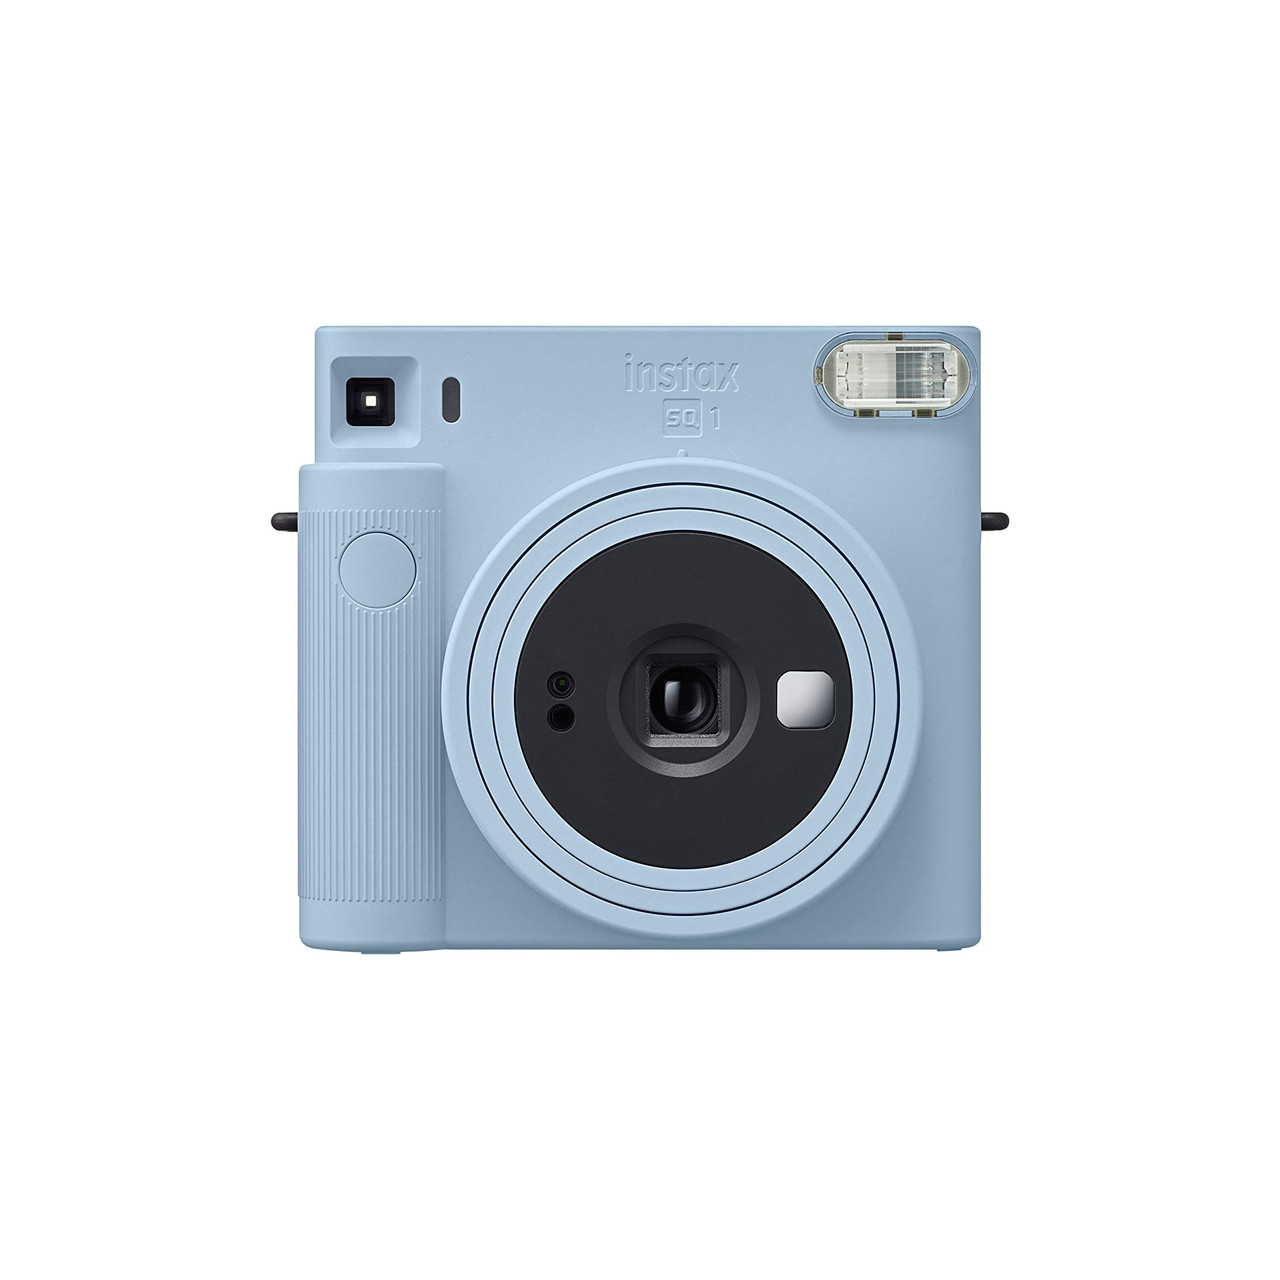 Depicted is a front-facing packshot of the Glacier Blue variant of the FujiFilm Instax Square SQ1 instant camera.